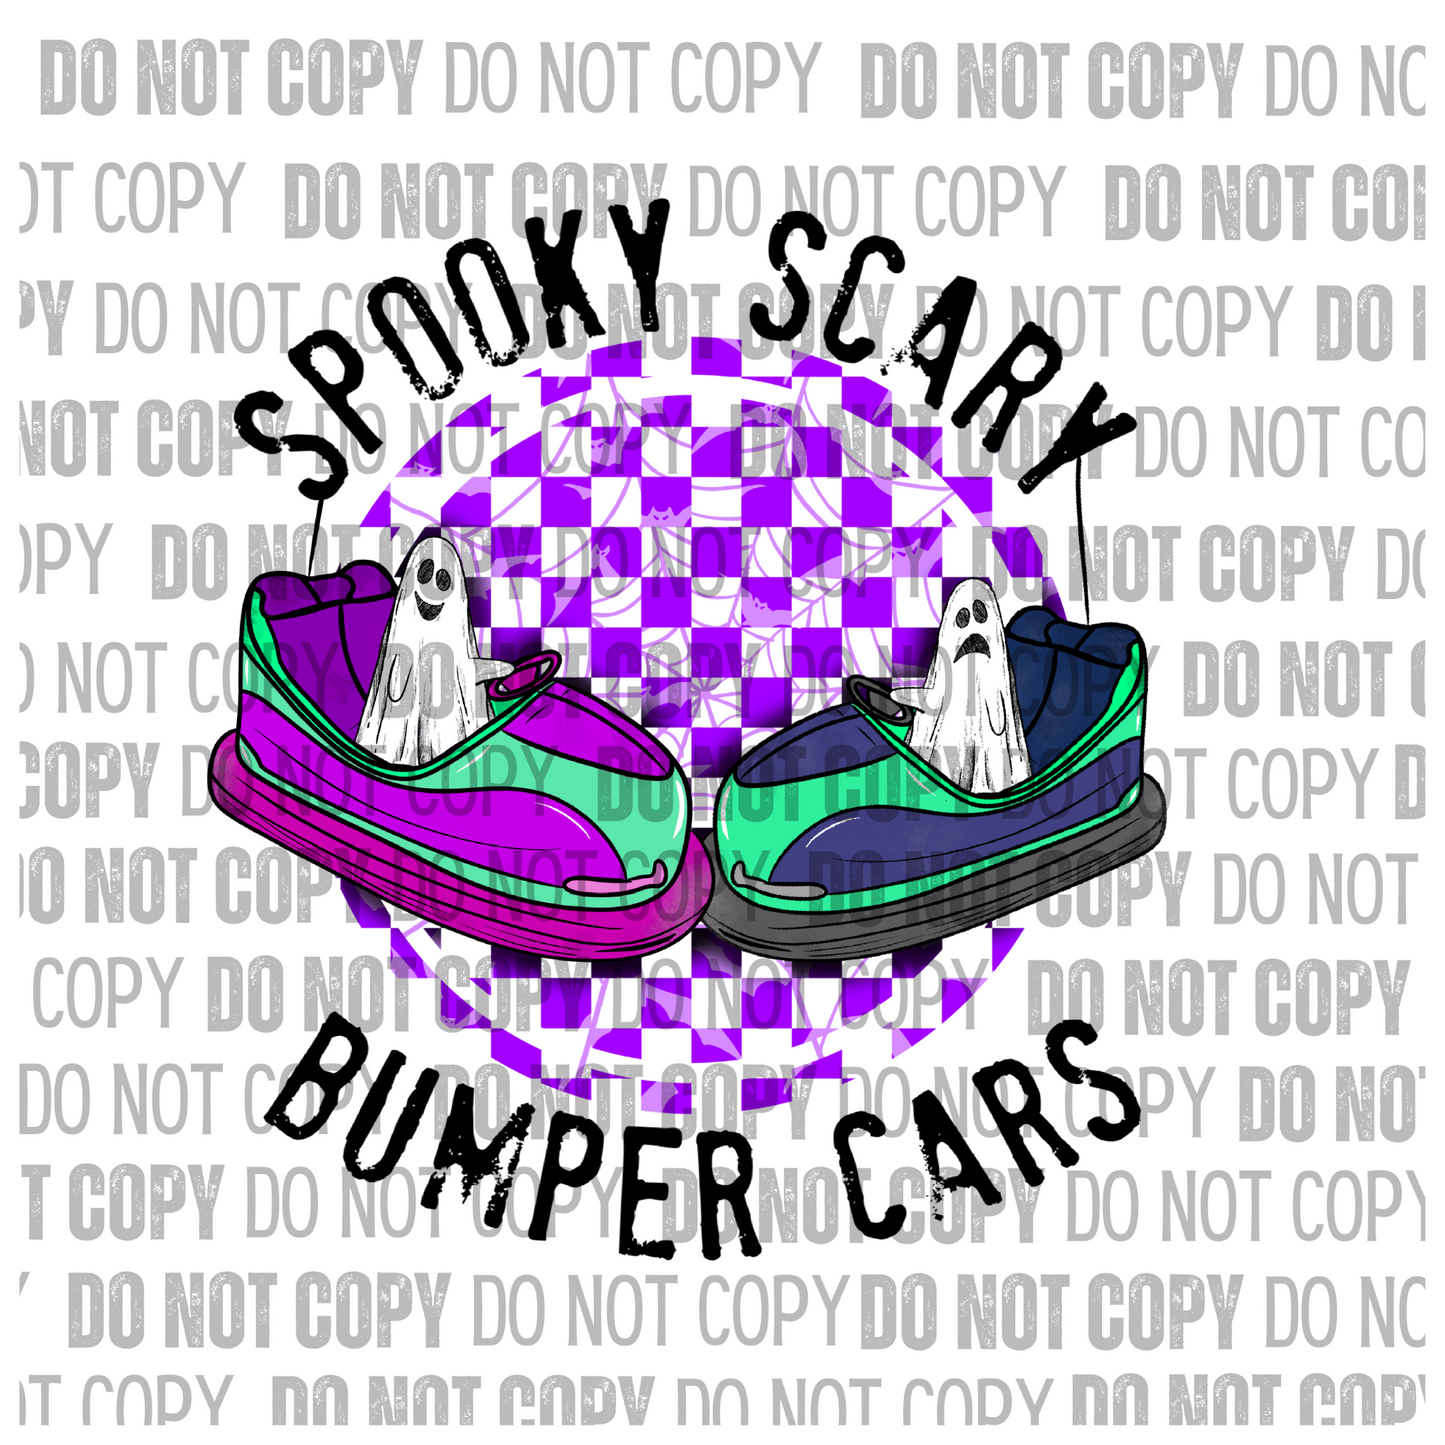 Spooky Scary Bumper Cars - Decal